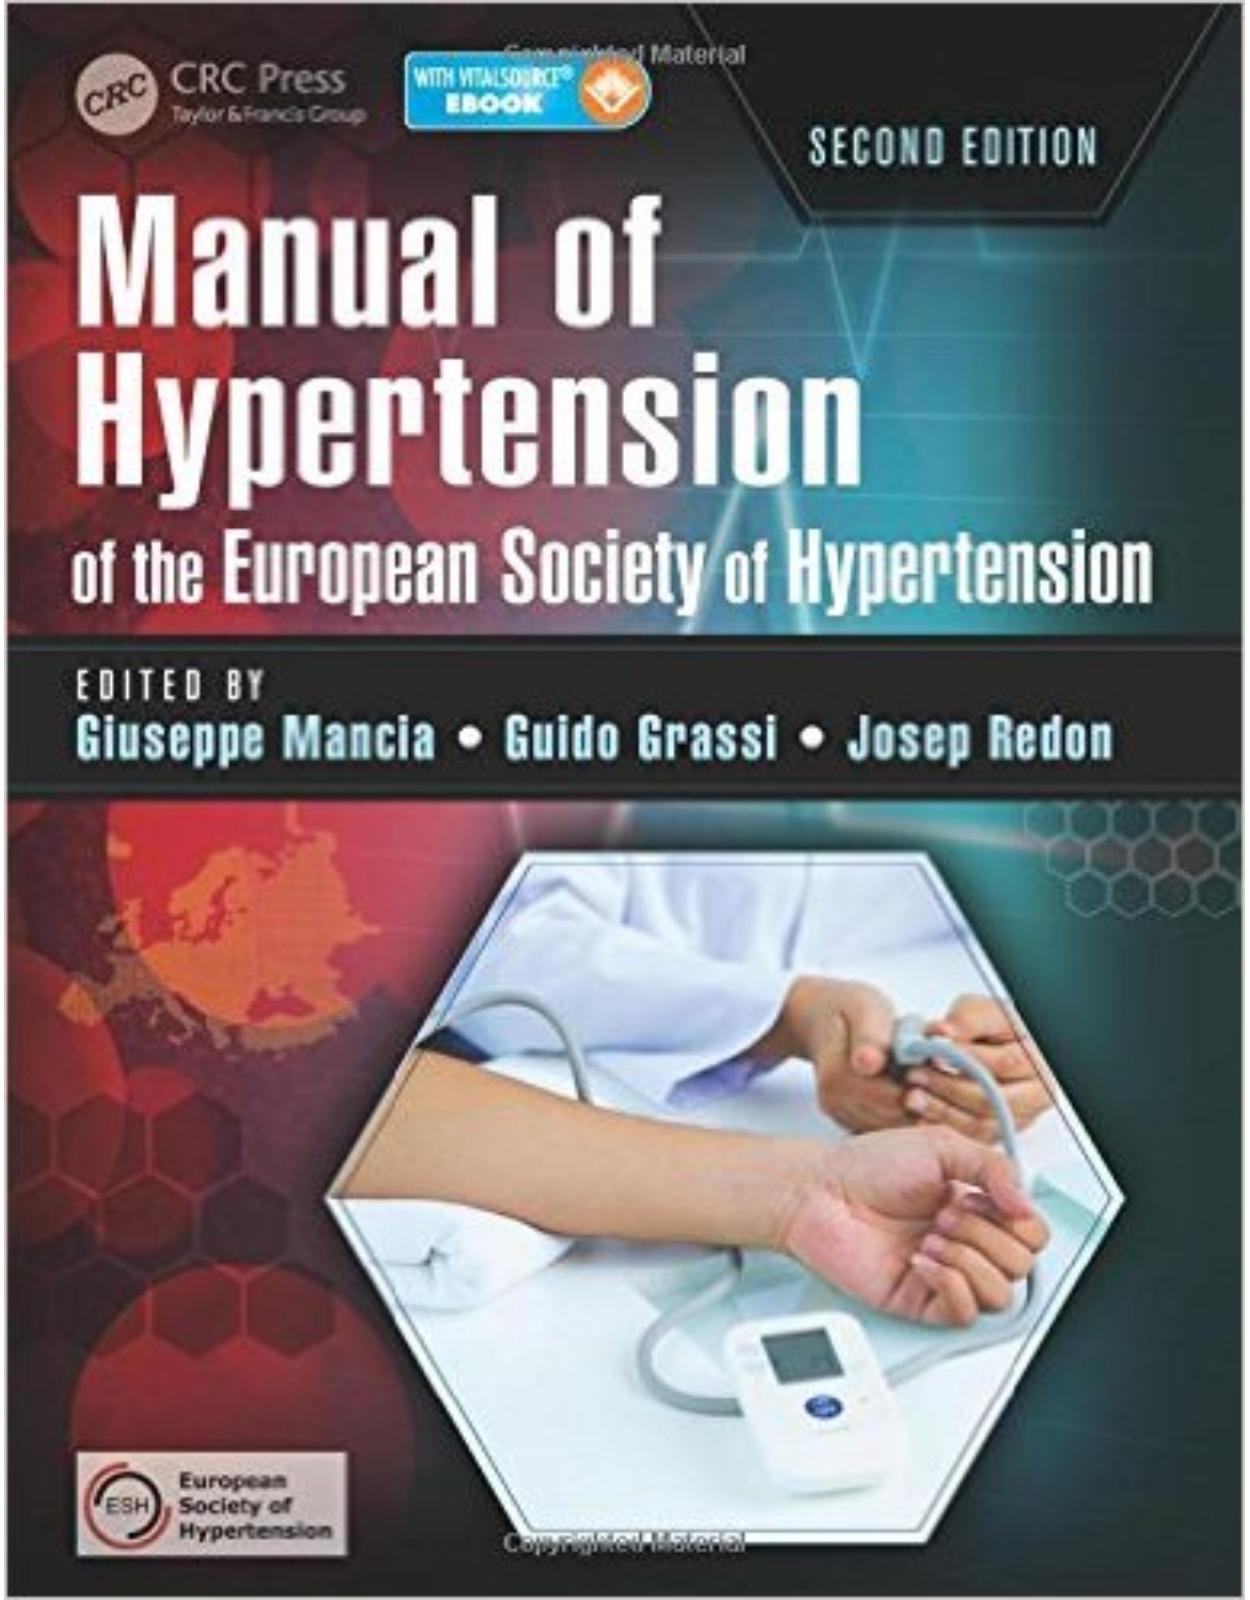 Manual of Hypertension of the European Society of Hypertension, Second Edition 